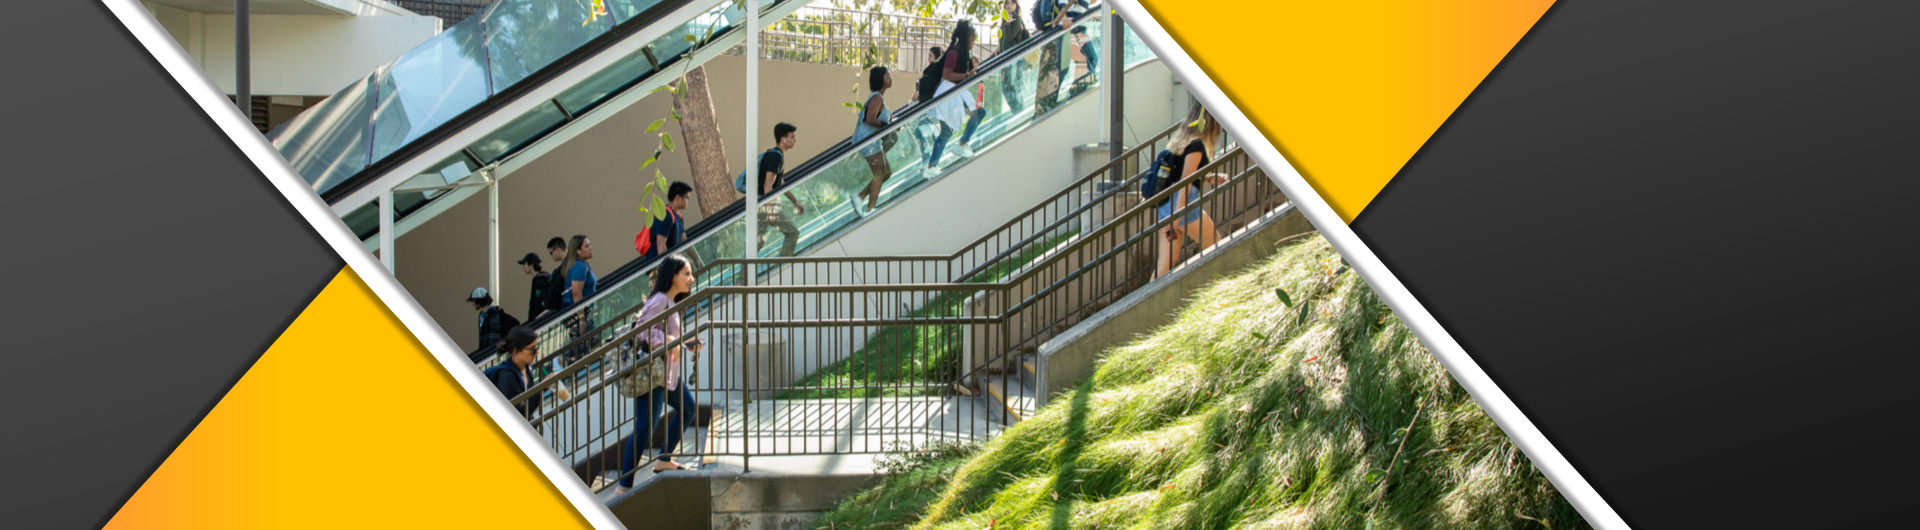 CSULB Career Development Center - Students home page